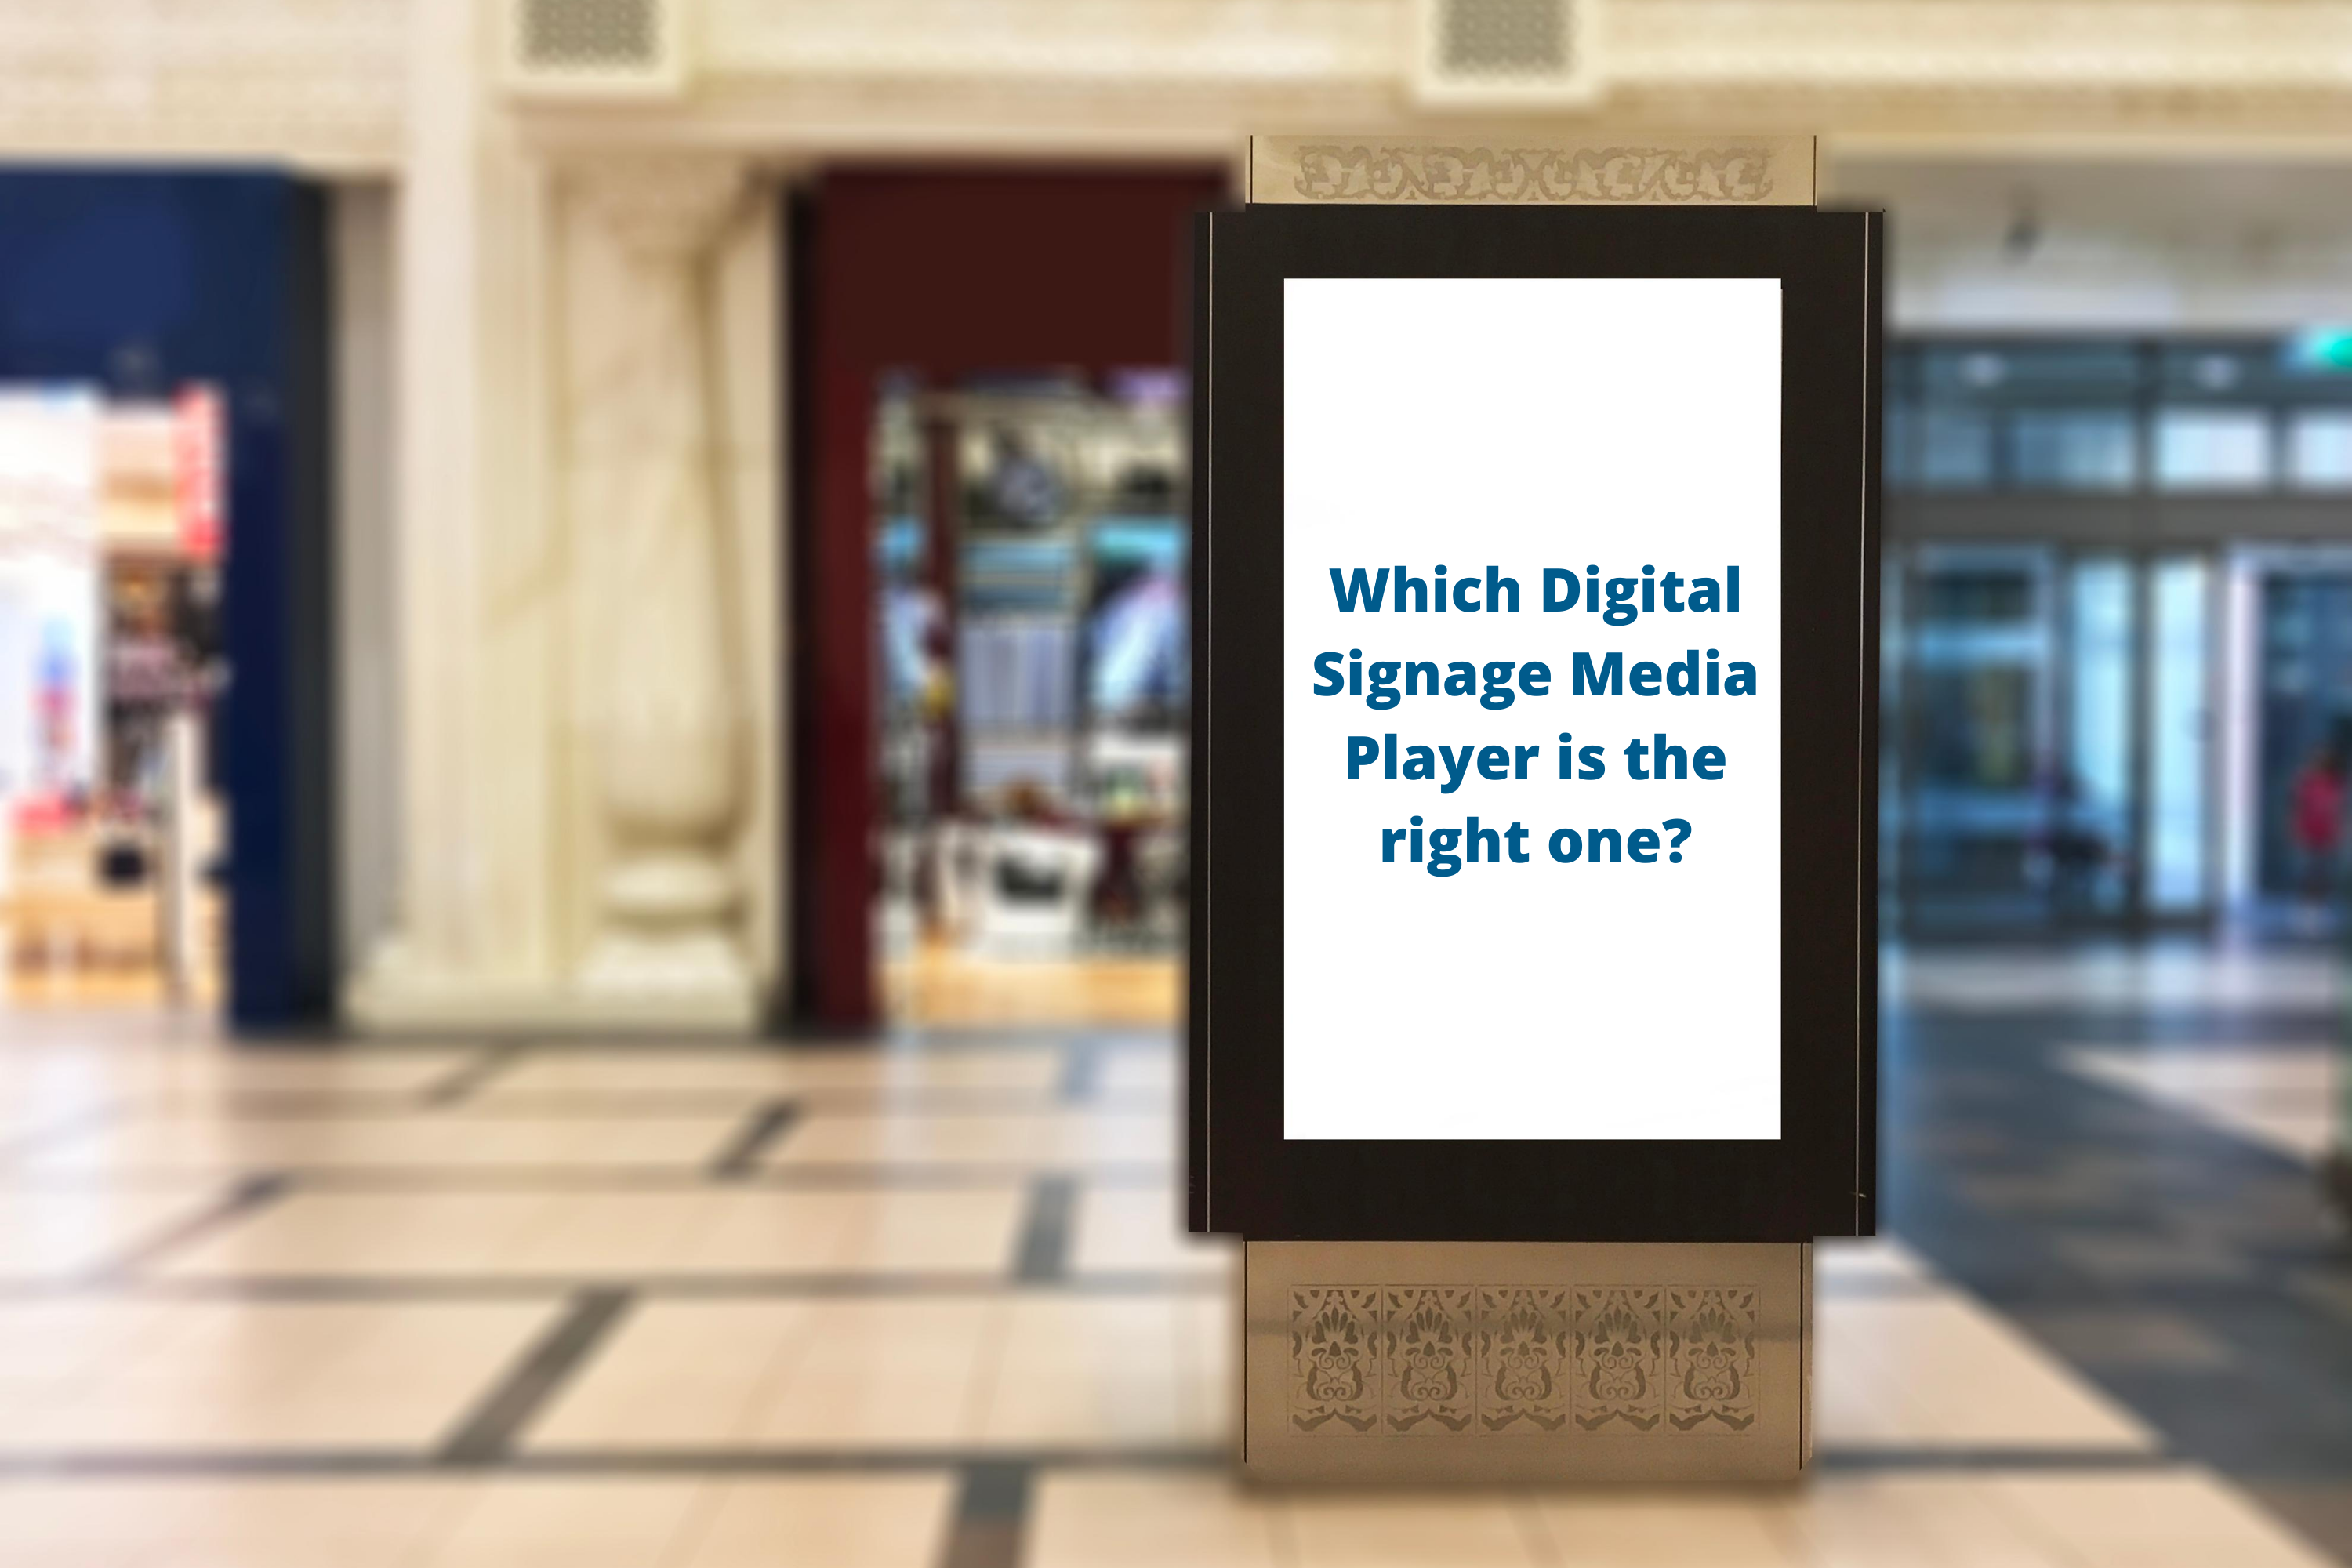 Which Digital Signage Media Player is the right one?